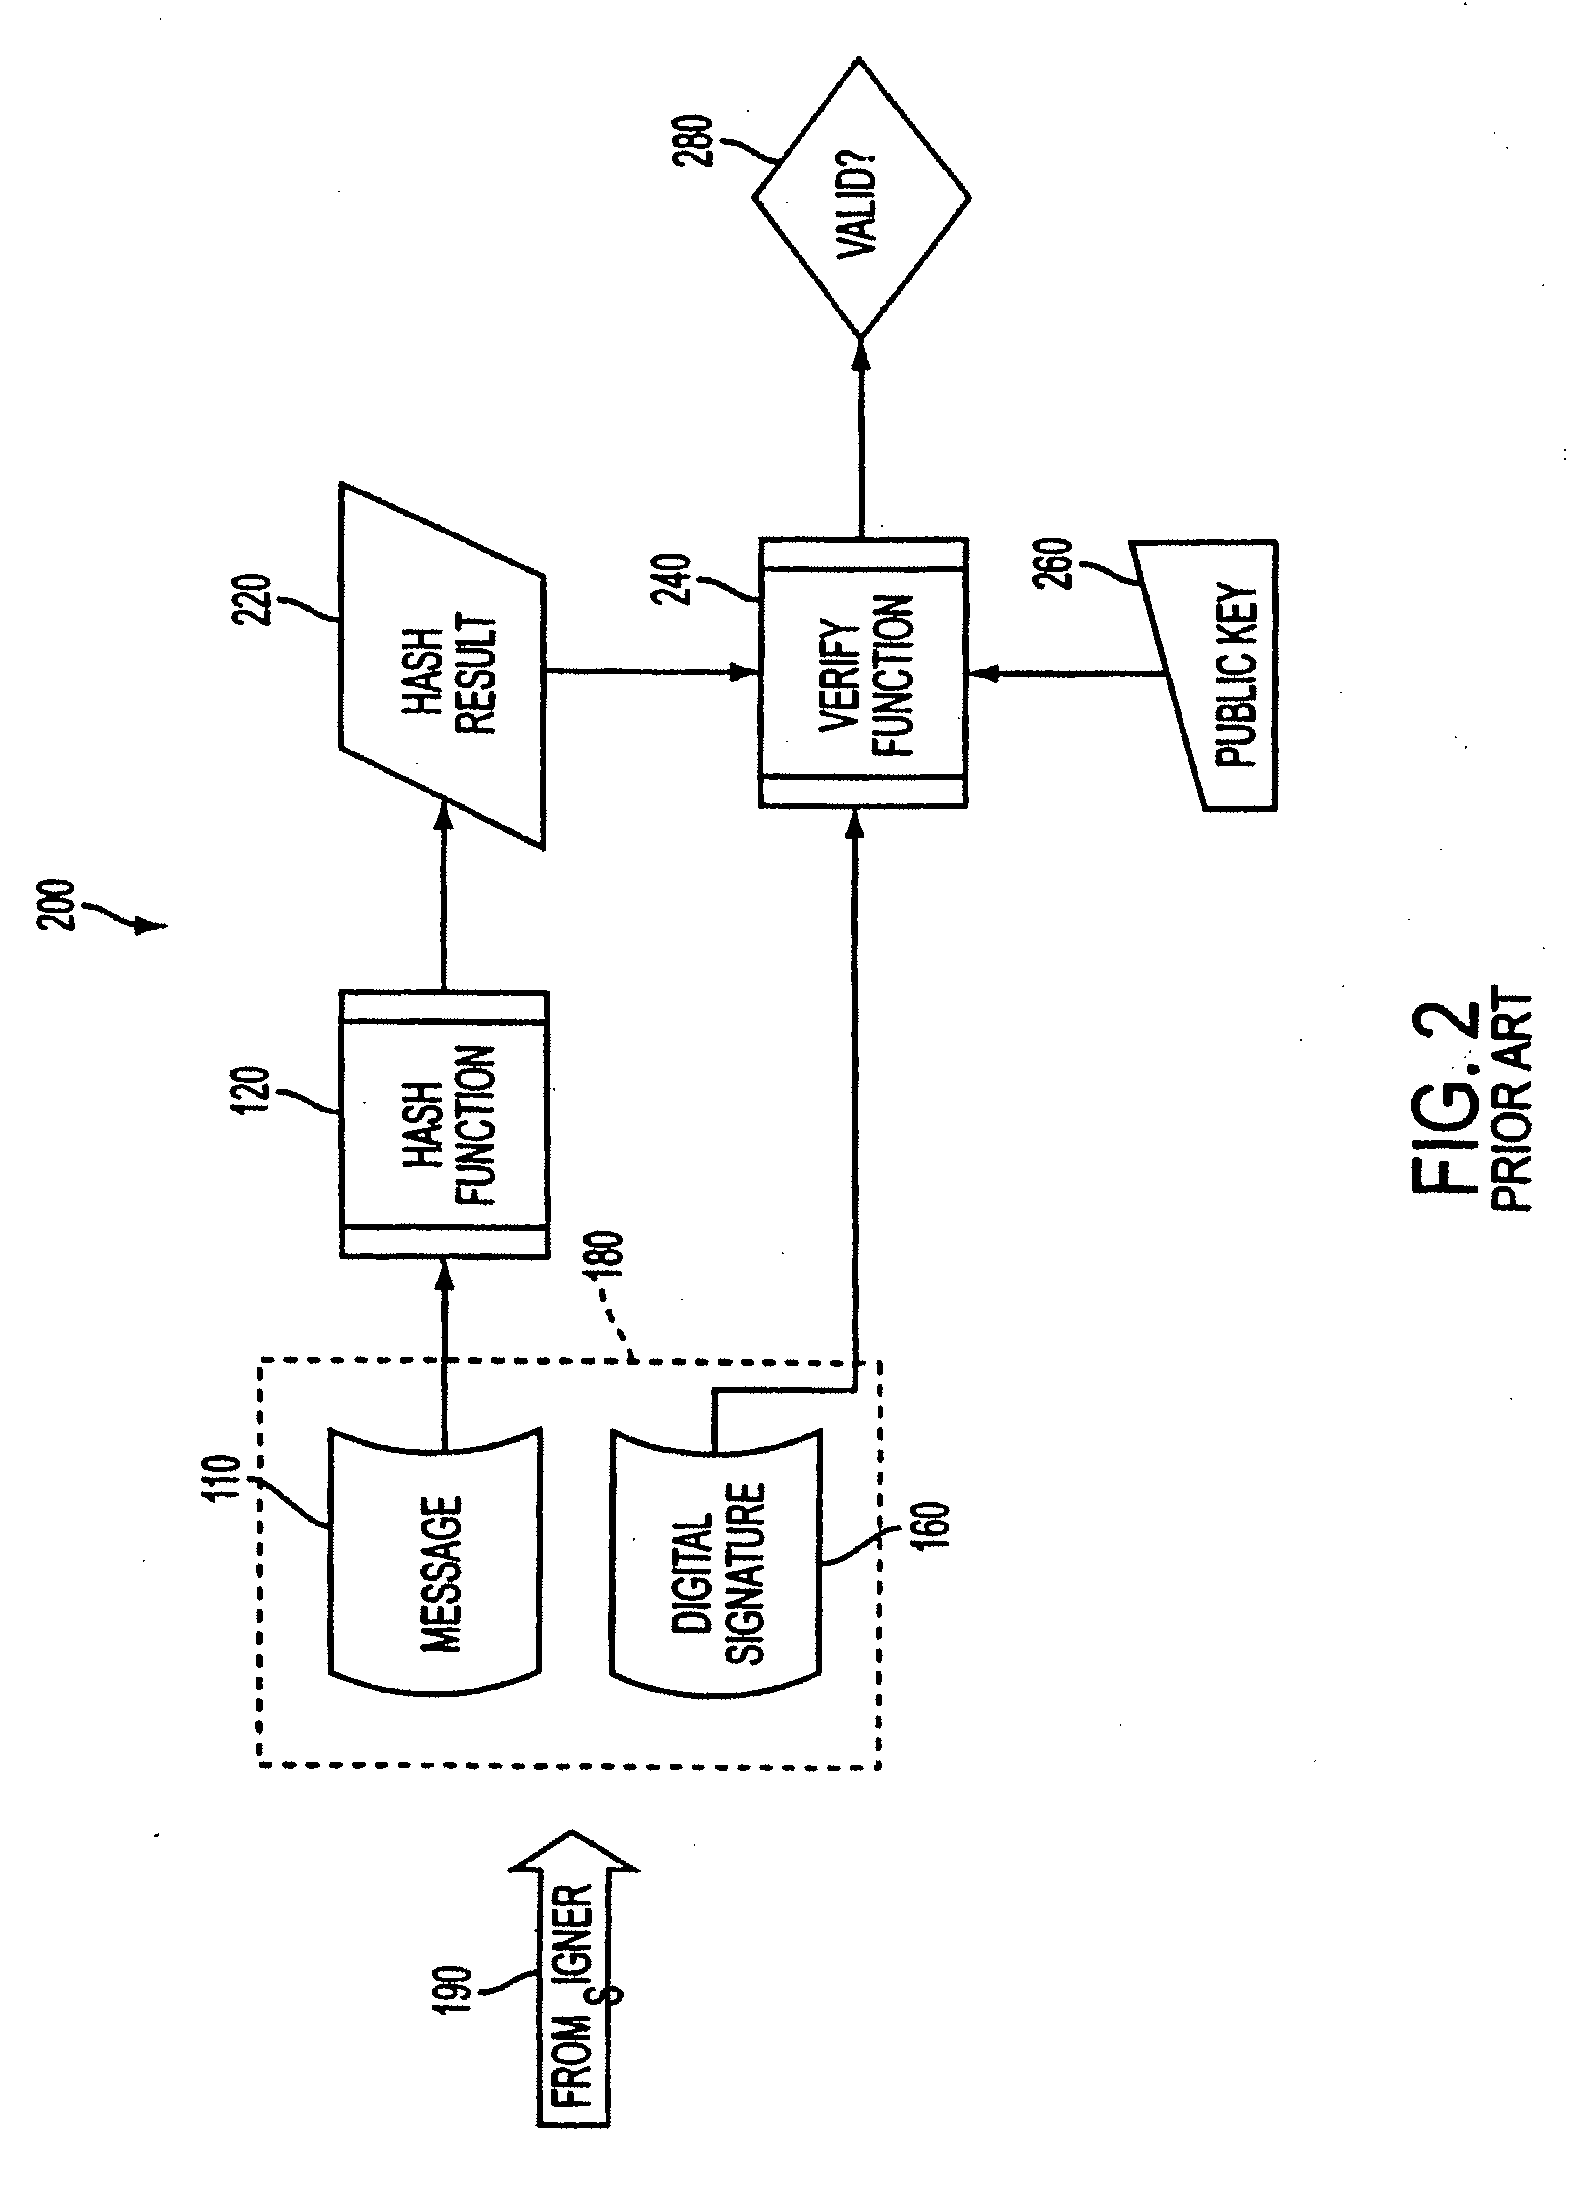 System and methods for distributing trusted time